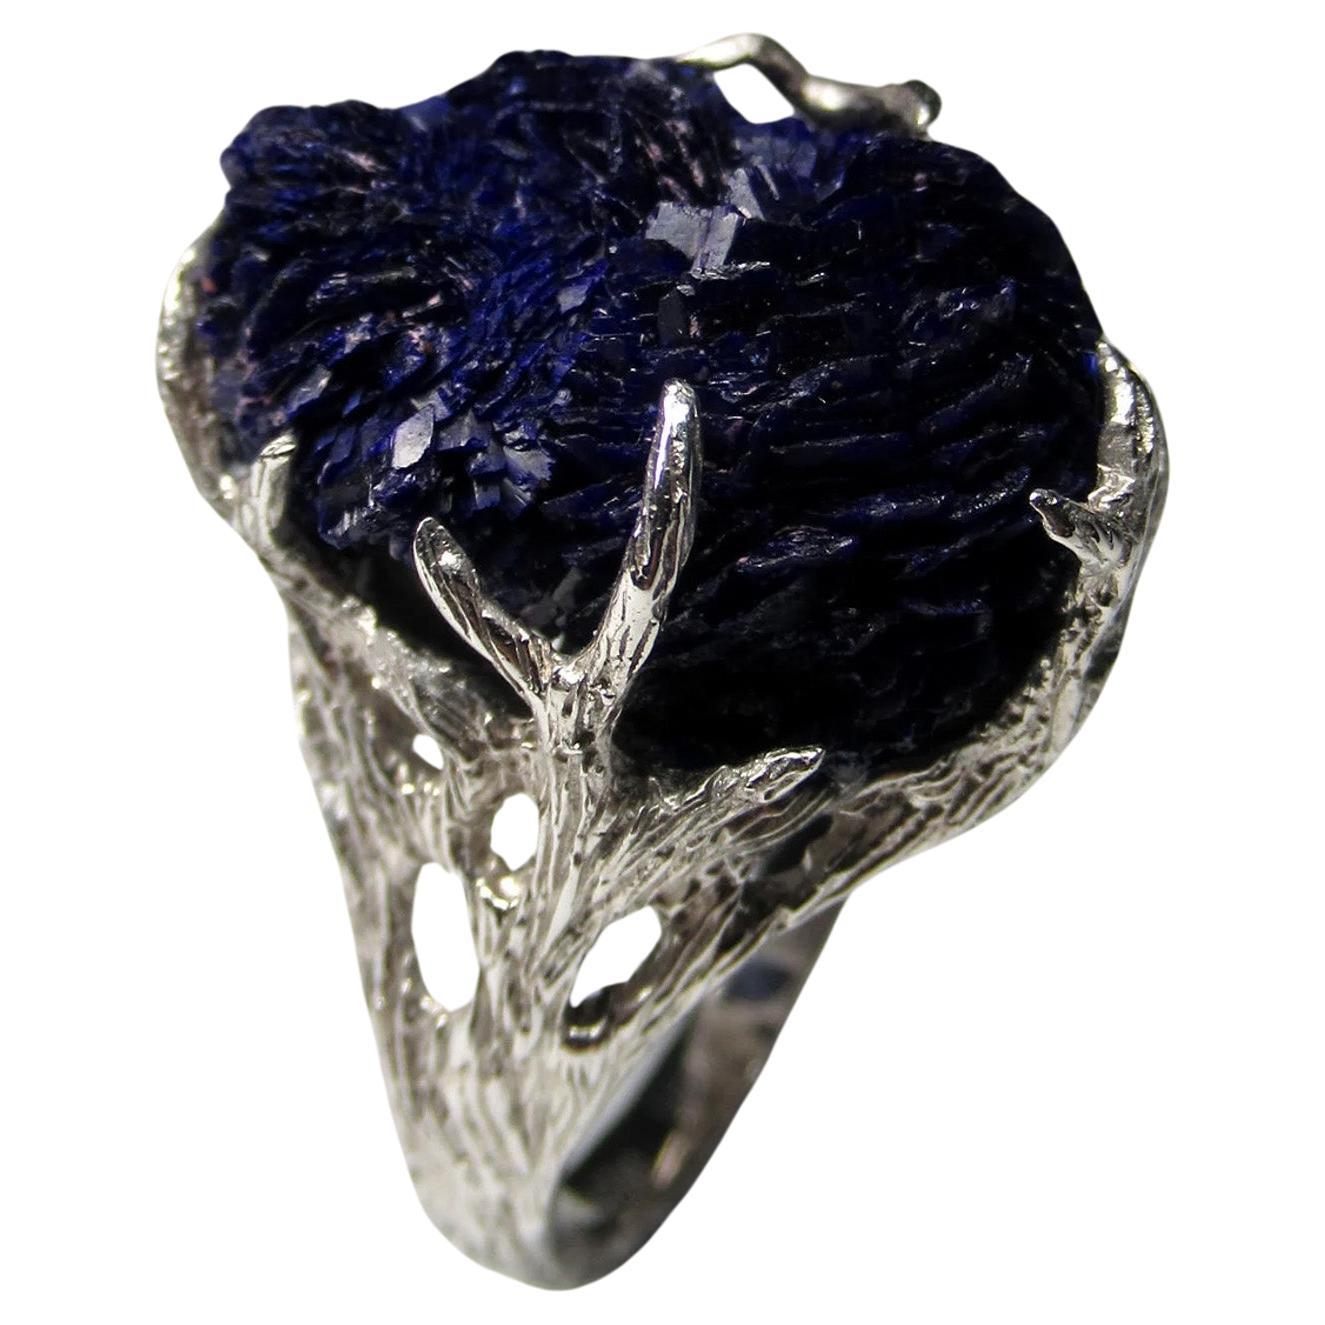 Azurite Silver Ring Amazing Rare Natural Blue Raw Azurite Crystals Gemstone  For Sale